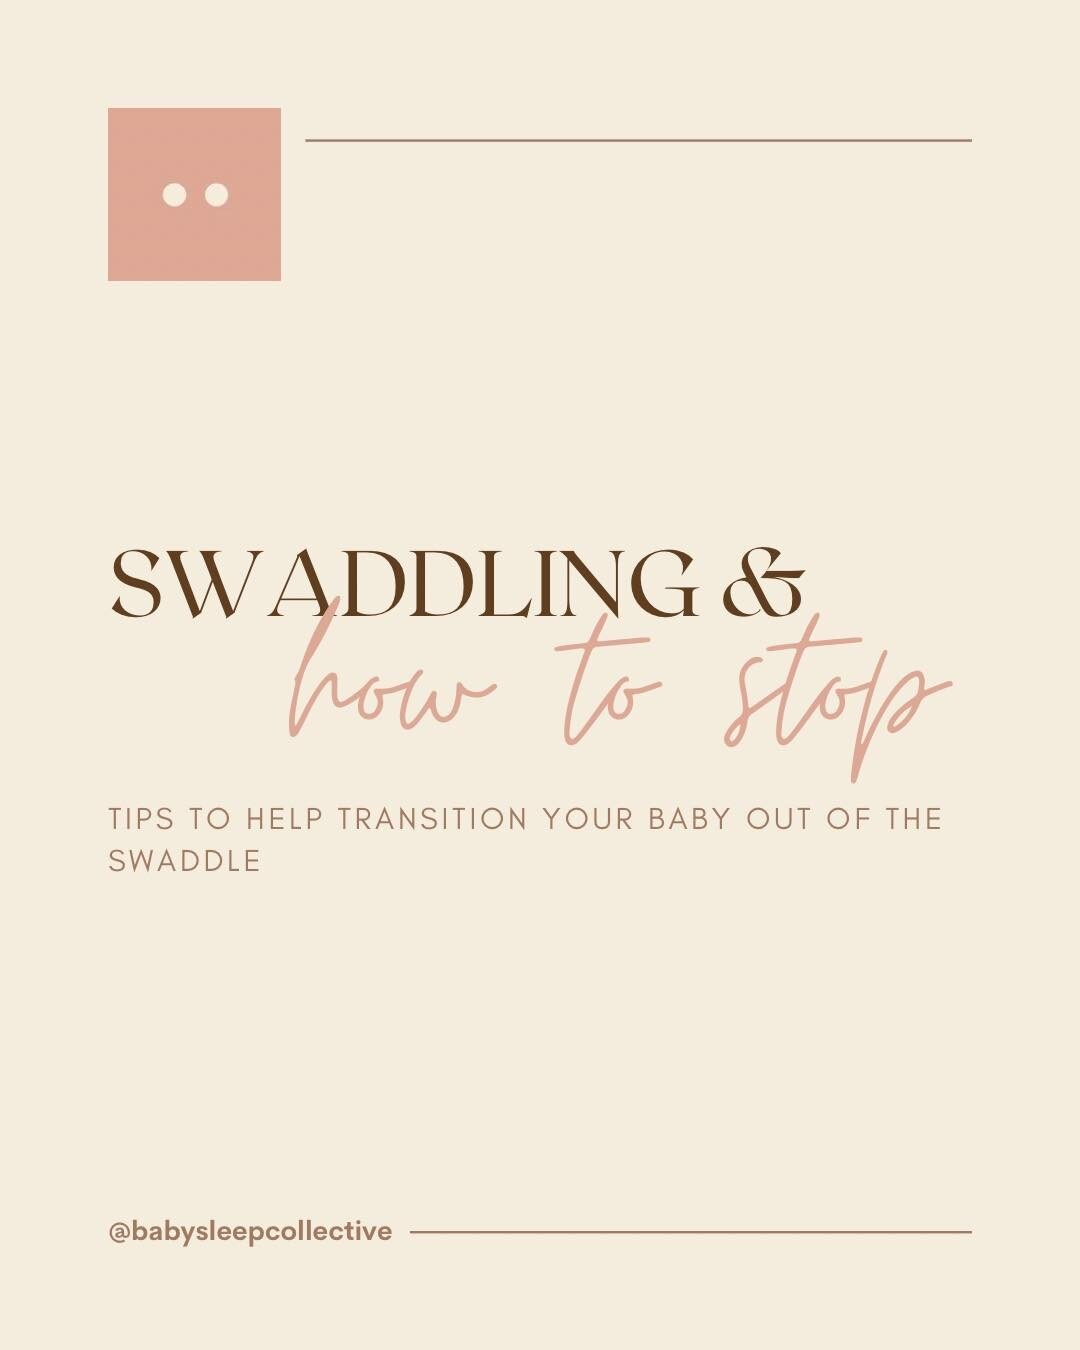 💥 Swaddling &amp; how to stop 👇🏻

👉🏻 Are you thinking about transitioning your little one out of their swaddle?

Read these tips to find out more 👇🏻

👌🏻 A great time to stop swaddling is from 4 months if the startle reflex has gone and you a